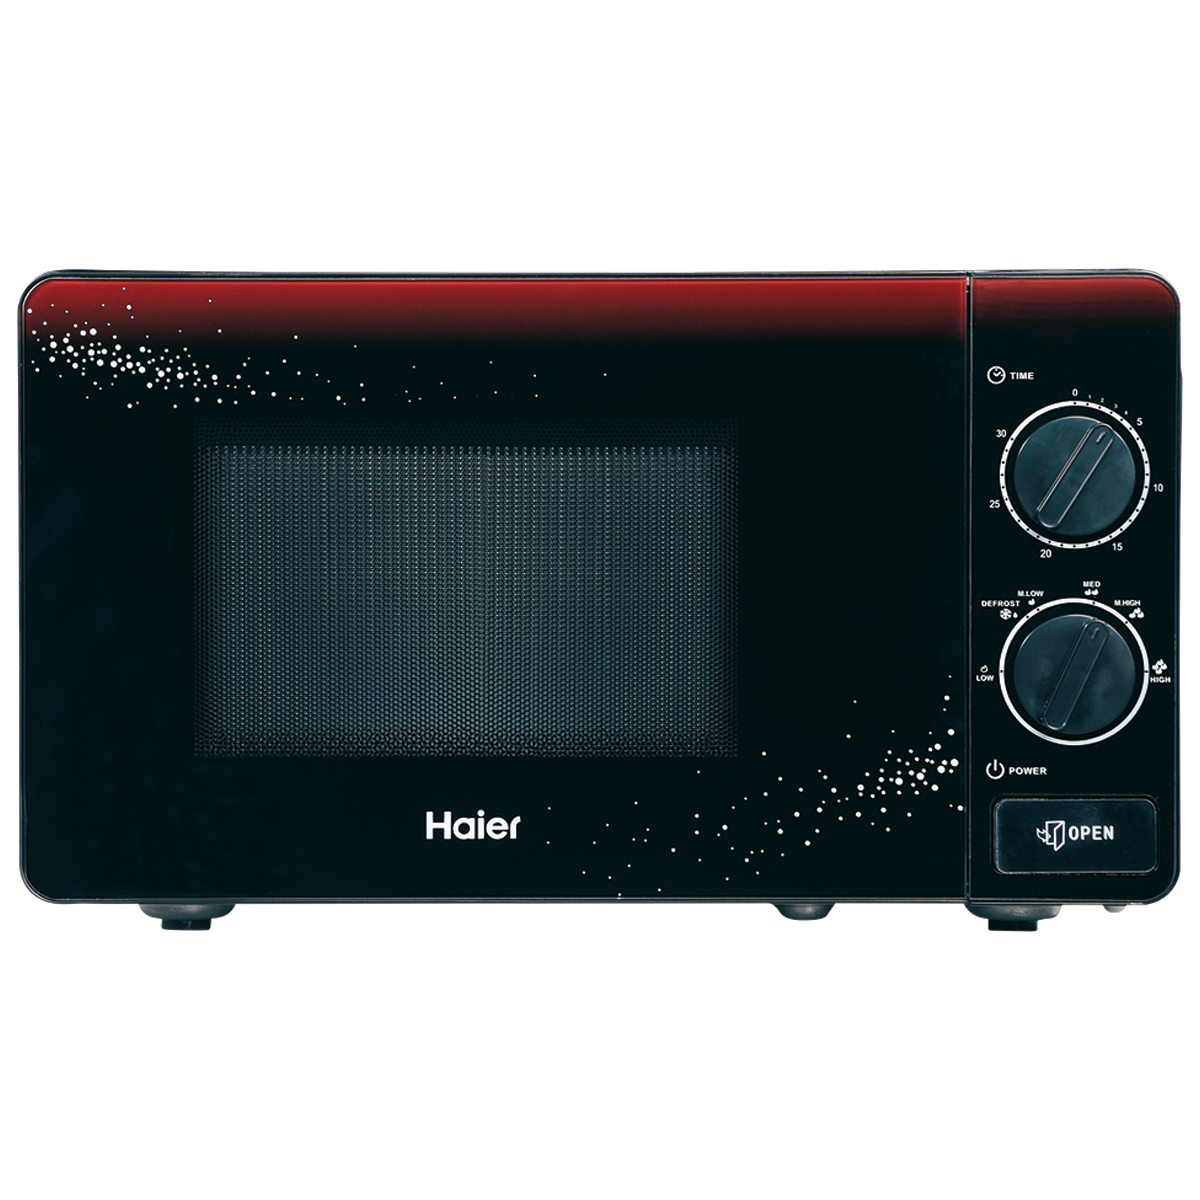 hdl-20mx89-l-20l-microwave-oven-even-heating-and-energy-efficient-haier-brand-price-in-pakistan.jpg